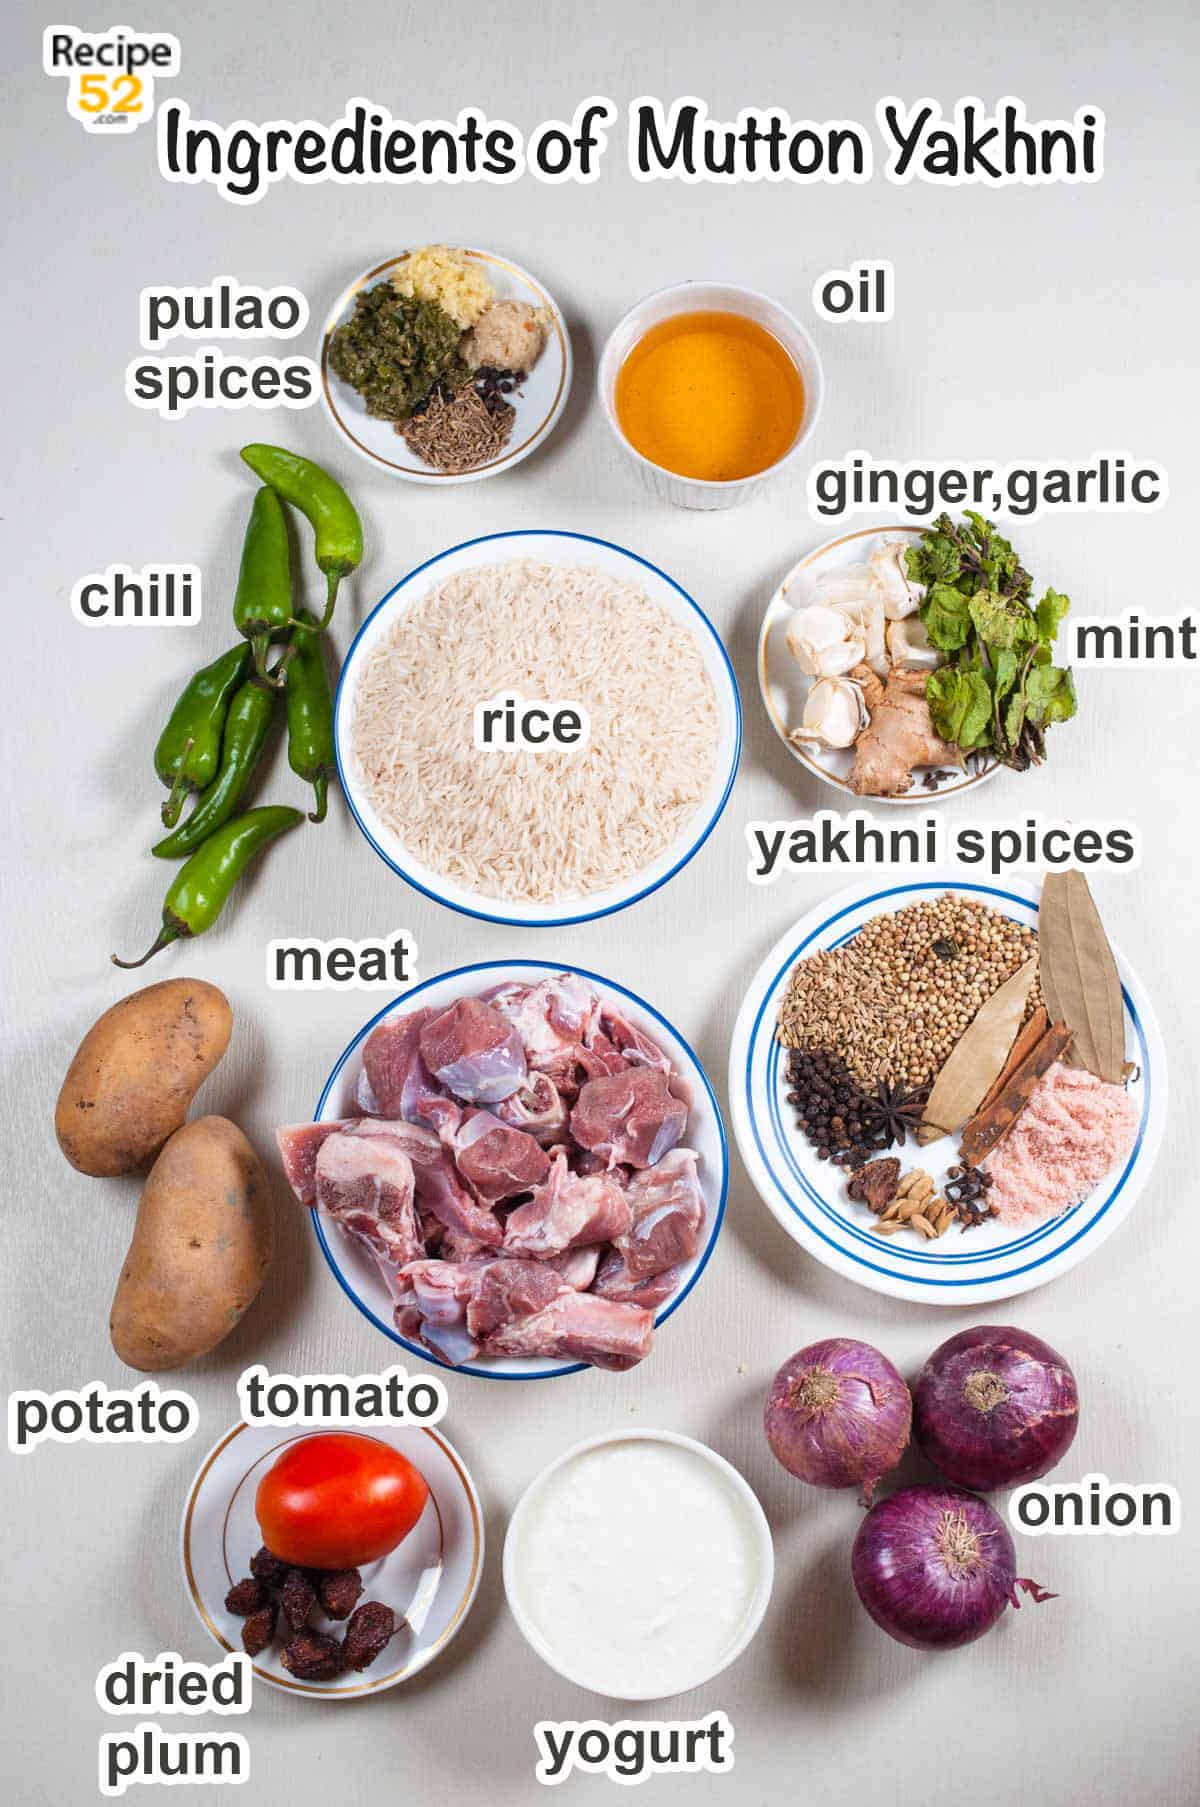 Ingredients of pulao.